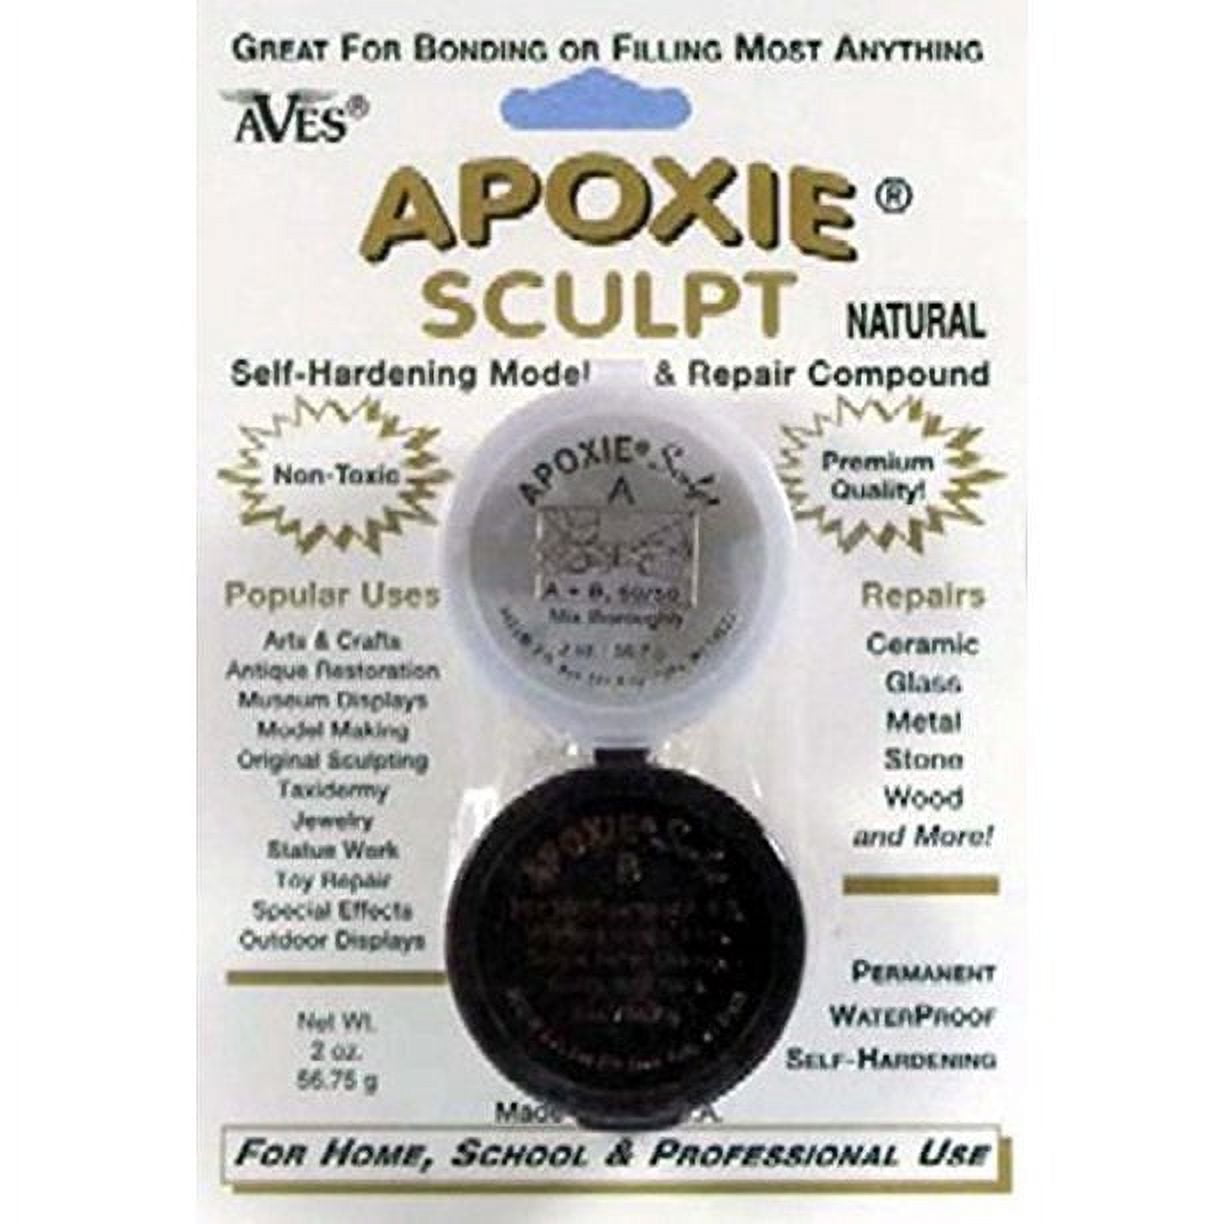 Apoxie Paste - Aves: Maker of Fine Clays and Maches, Apoxie Sculpt